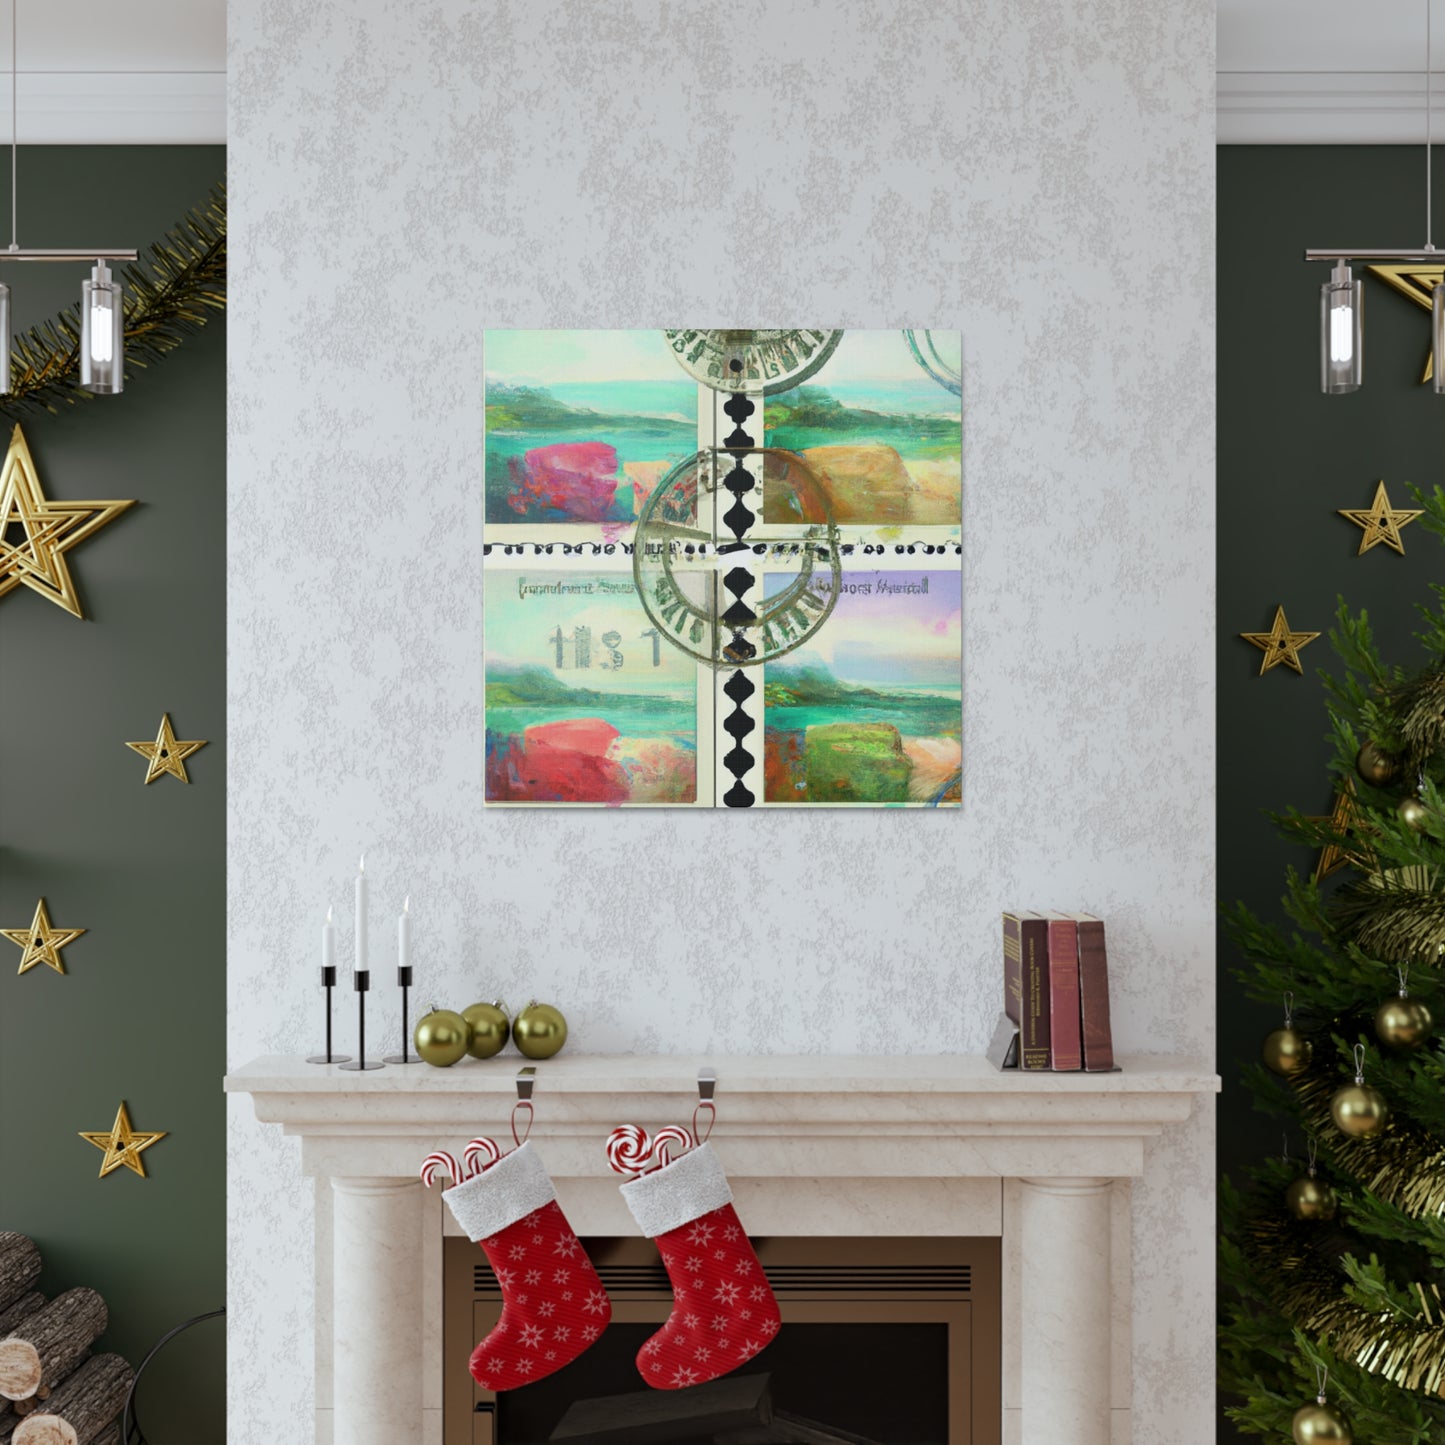 that celebrates Christmas

Winter Wonderland Christmas Stamps - Postage Stamp Collector Canvas Wall Art